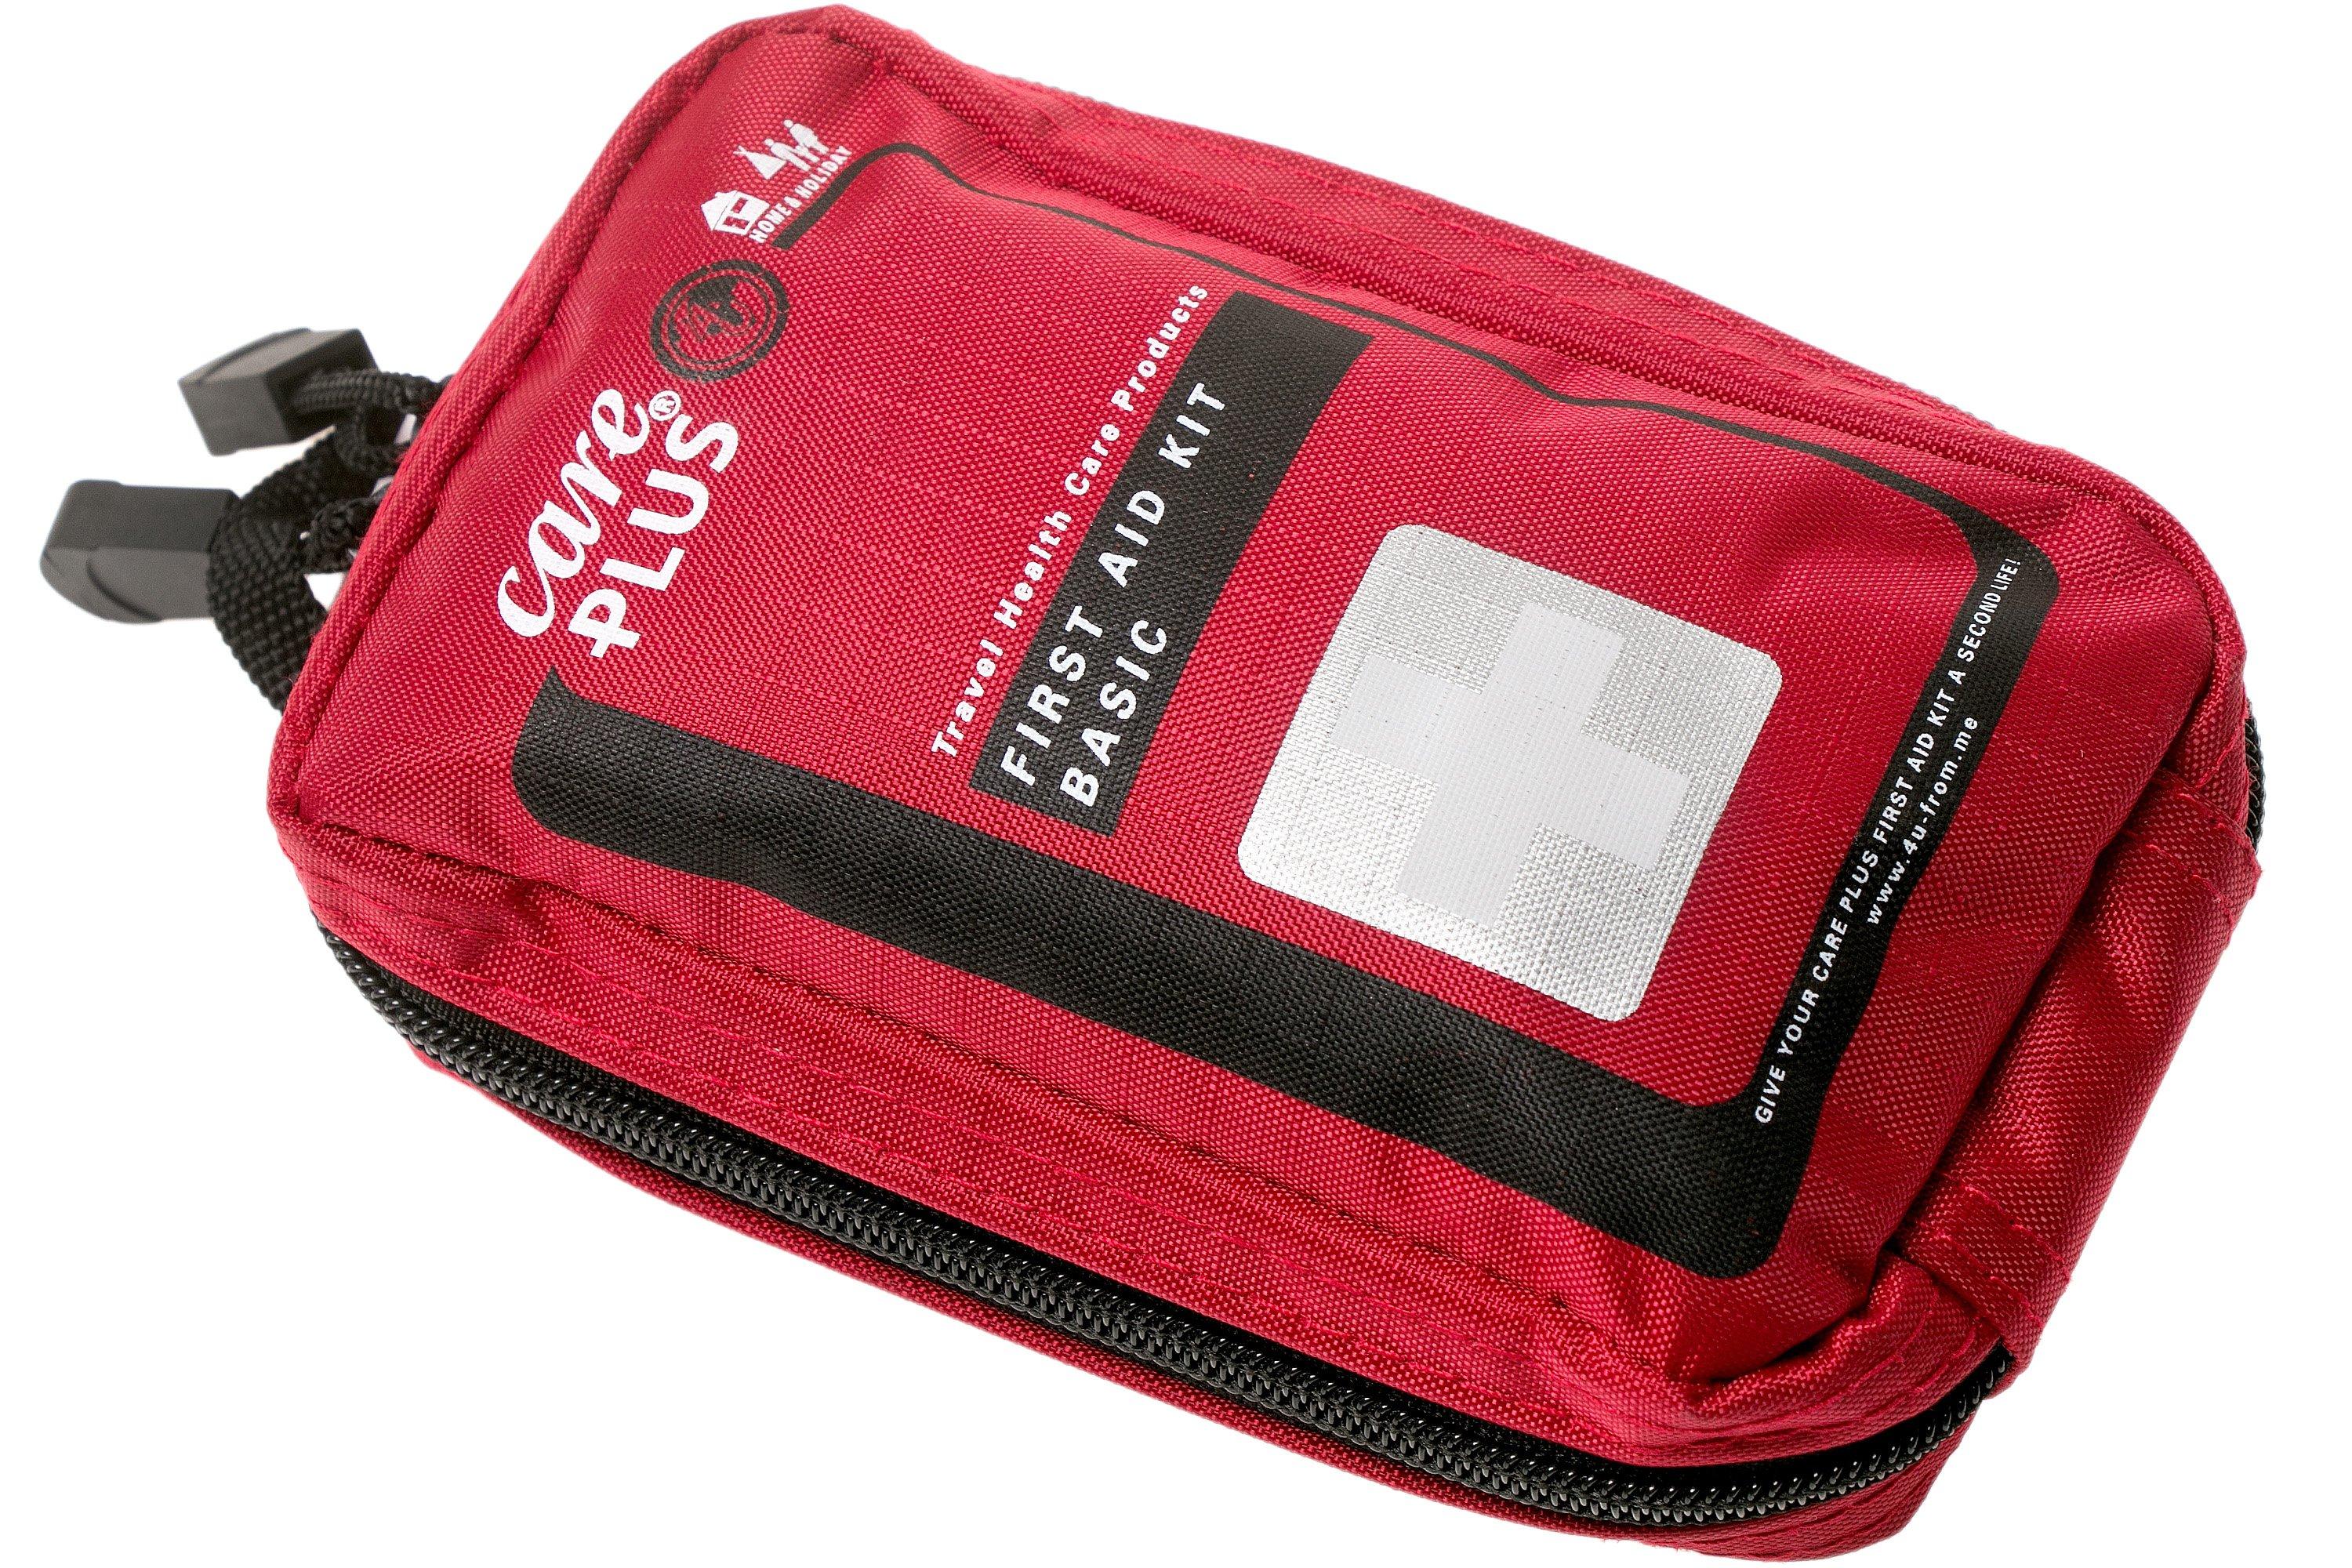 Annoteren knop grafiek Care Plus First Aid Kit Basic, basic first aid kit | Advantageously  shopping at Knivesandtools.com